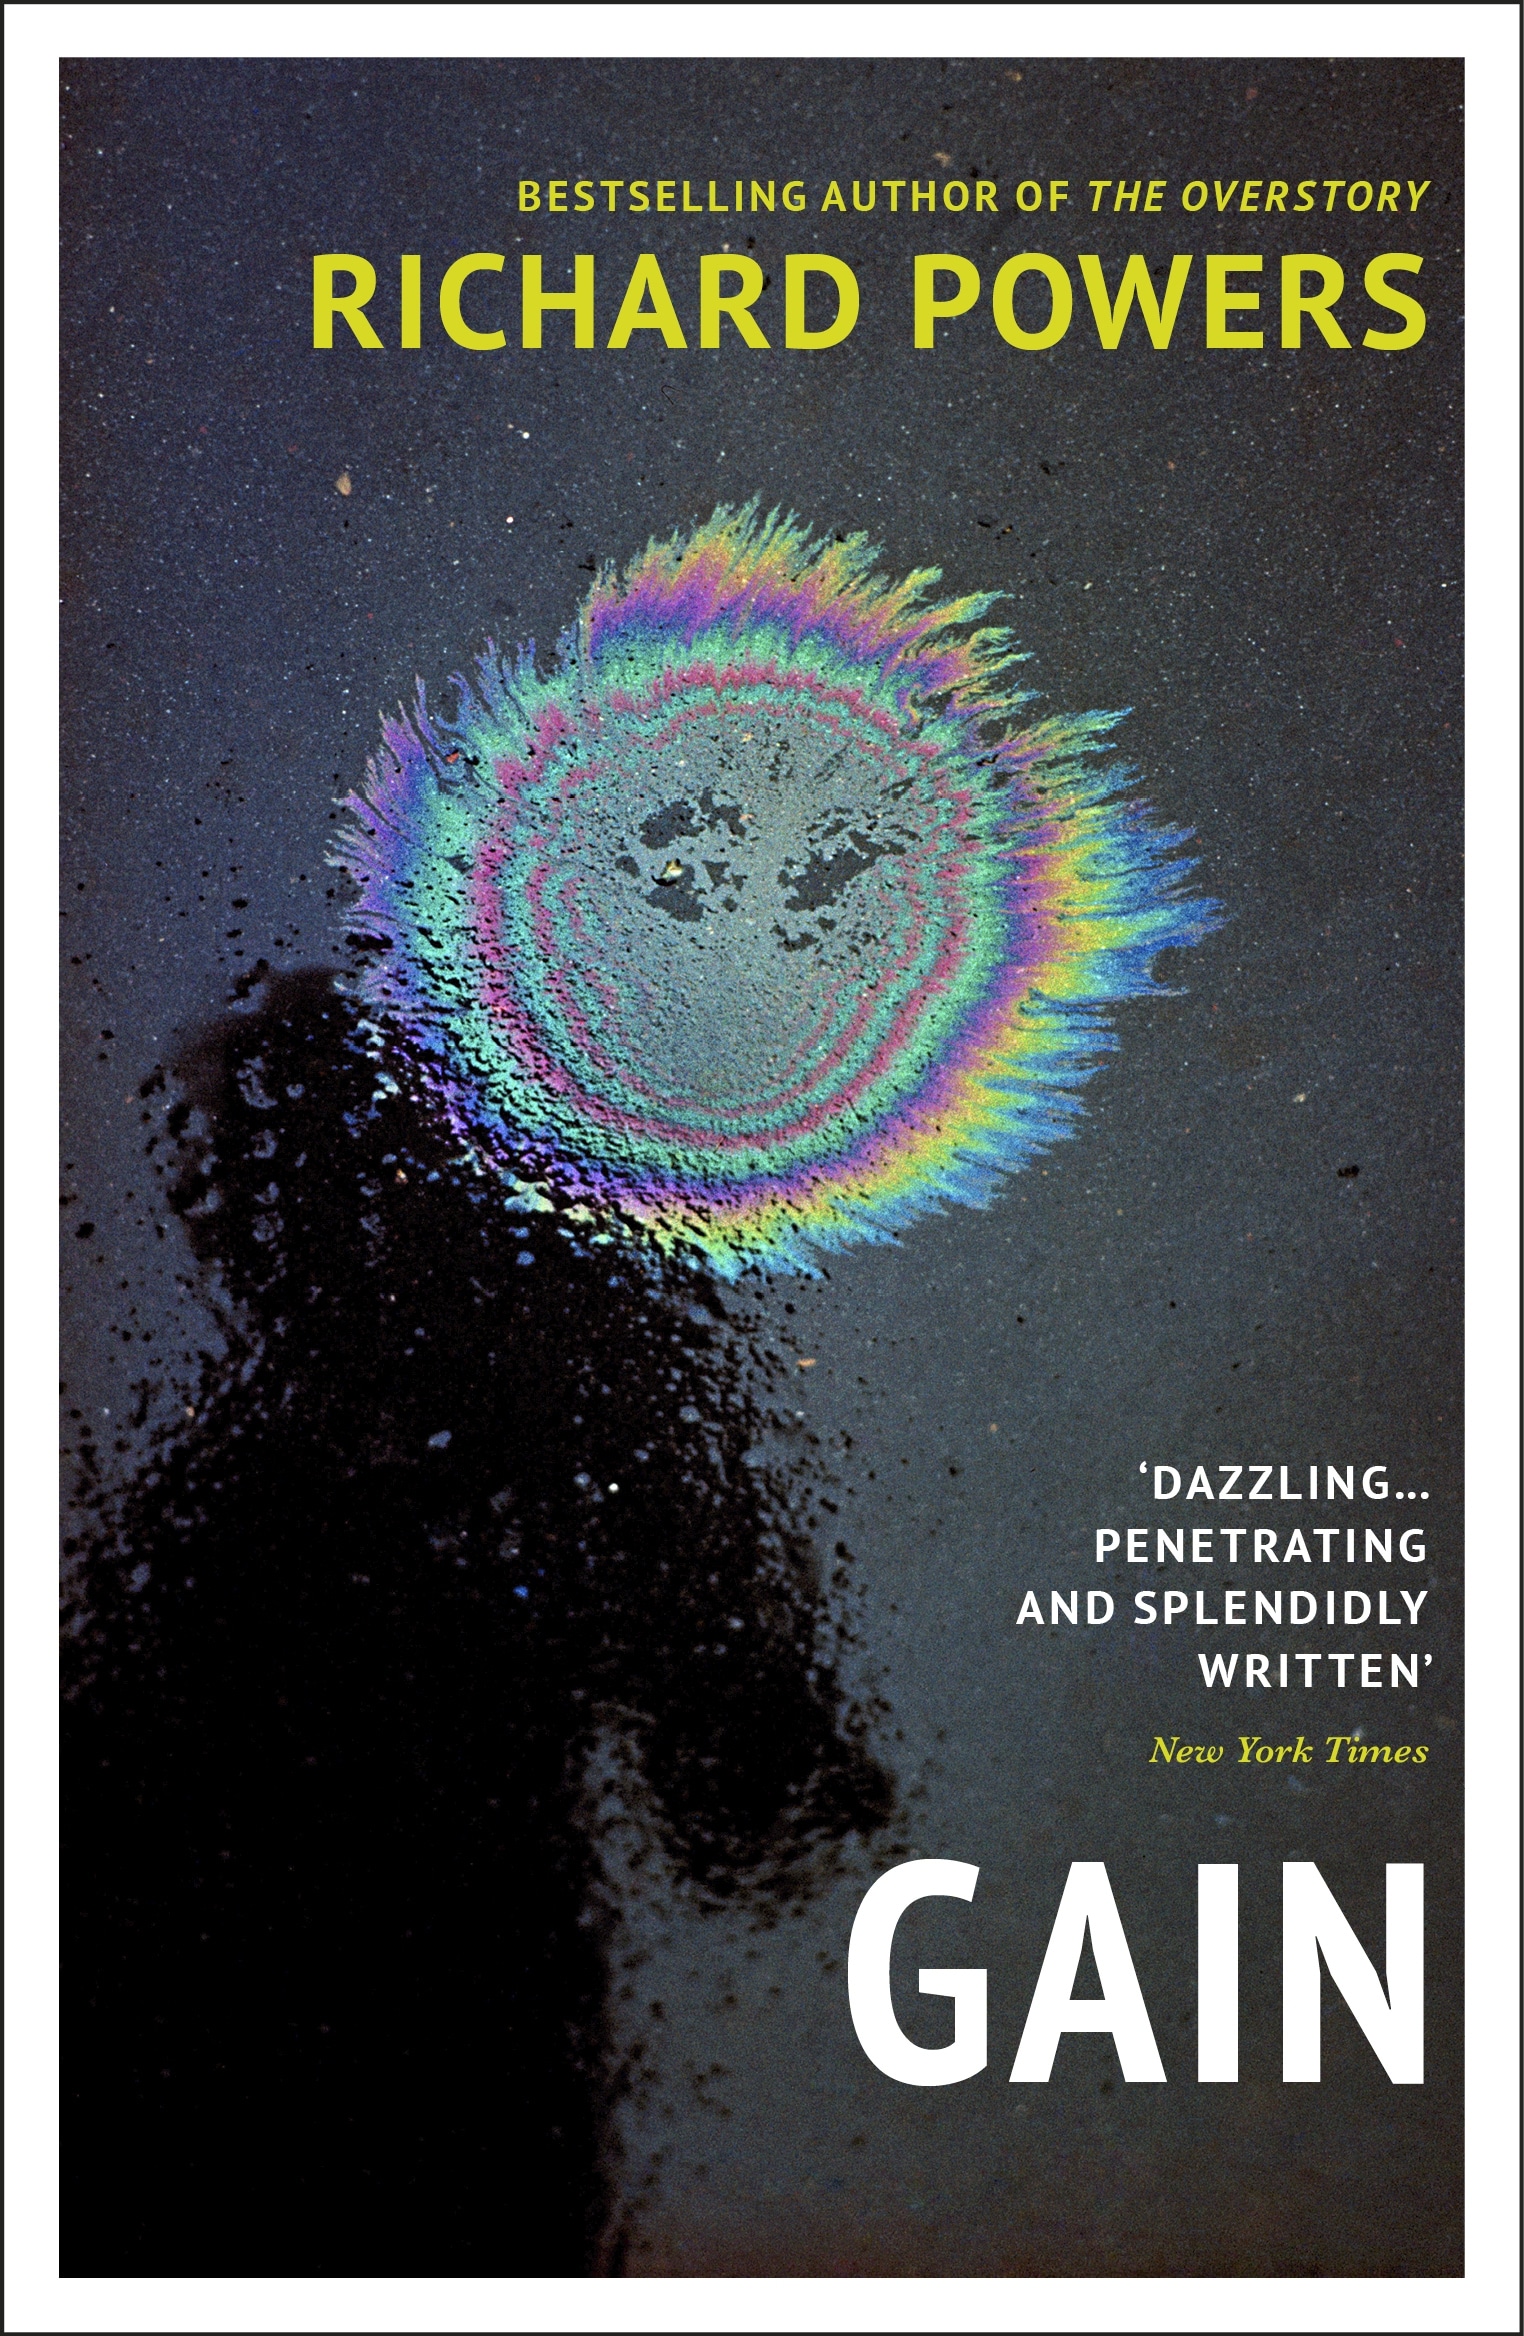 Book “Gain” by Richard Powers — September 16, 2021